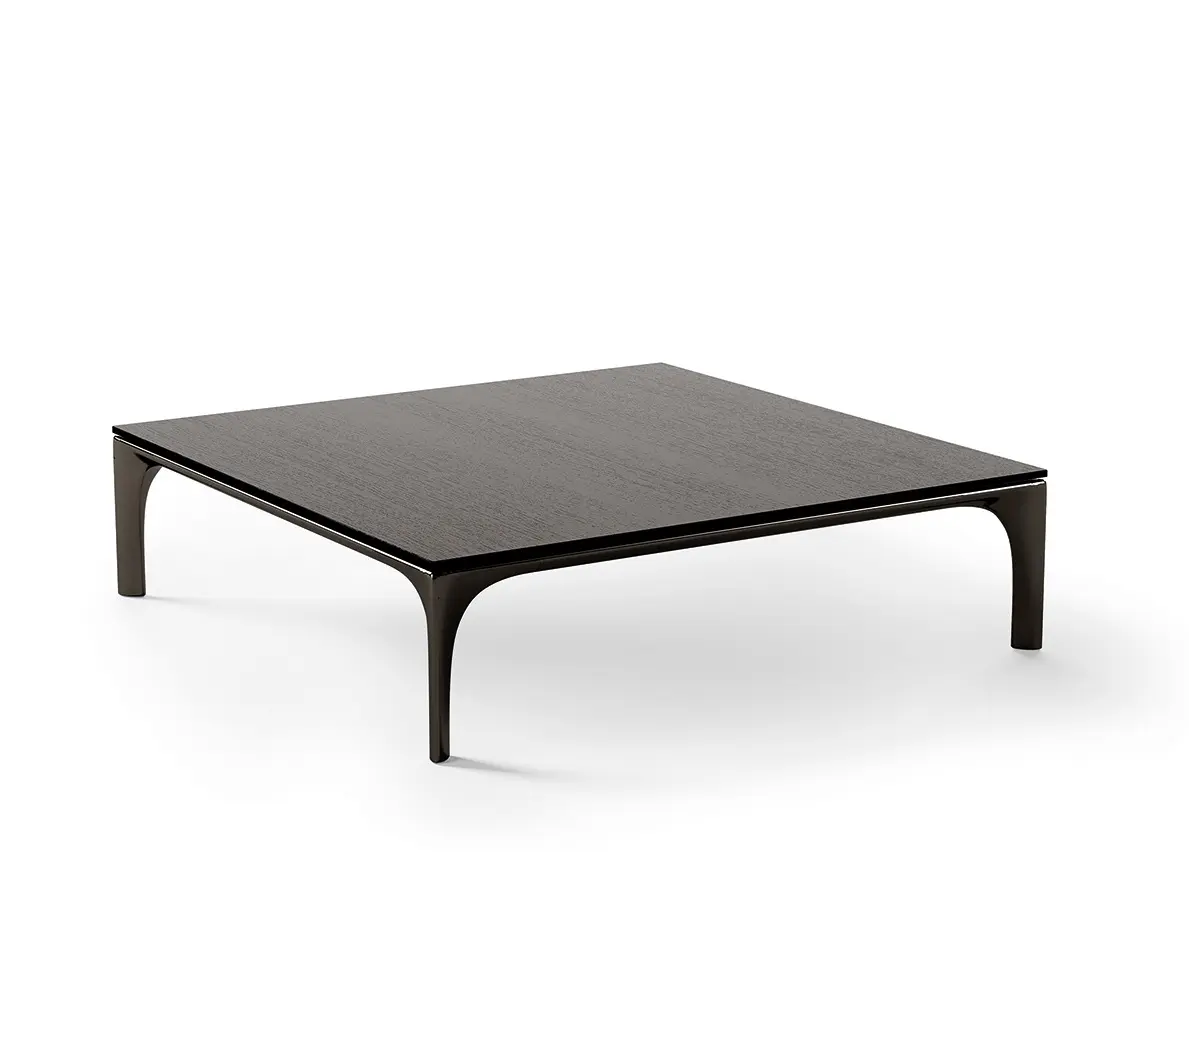 Black Coated Durable Aluminium Coffee Dining Table Elegant For Indoor Home Furniture Decor Usage In Affordable Price